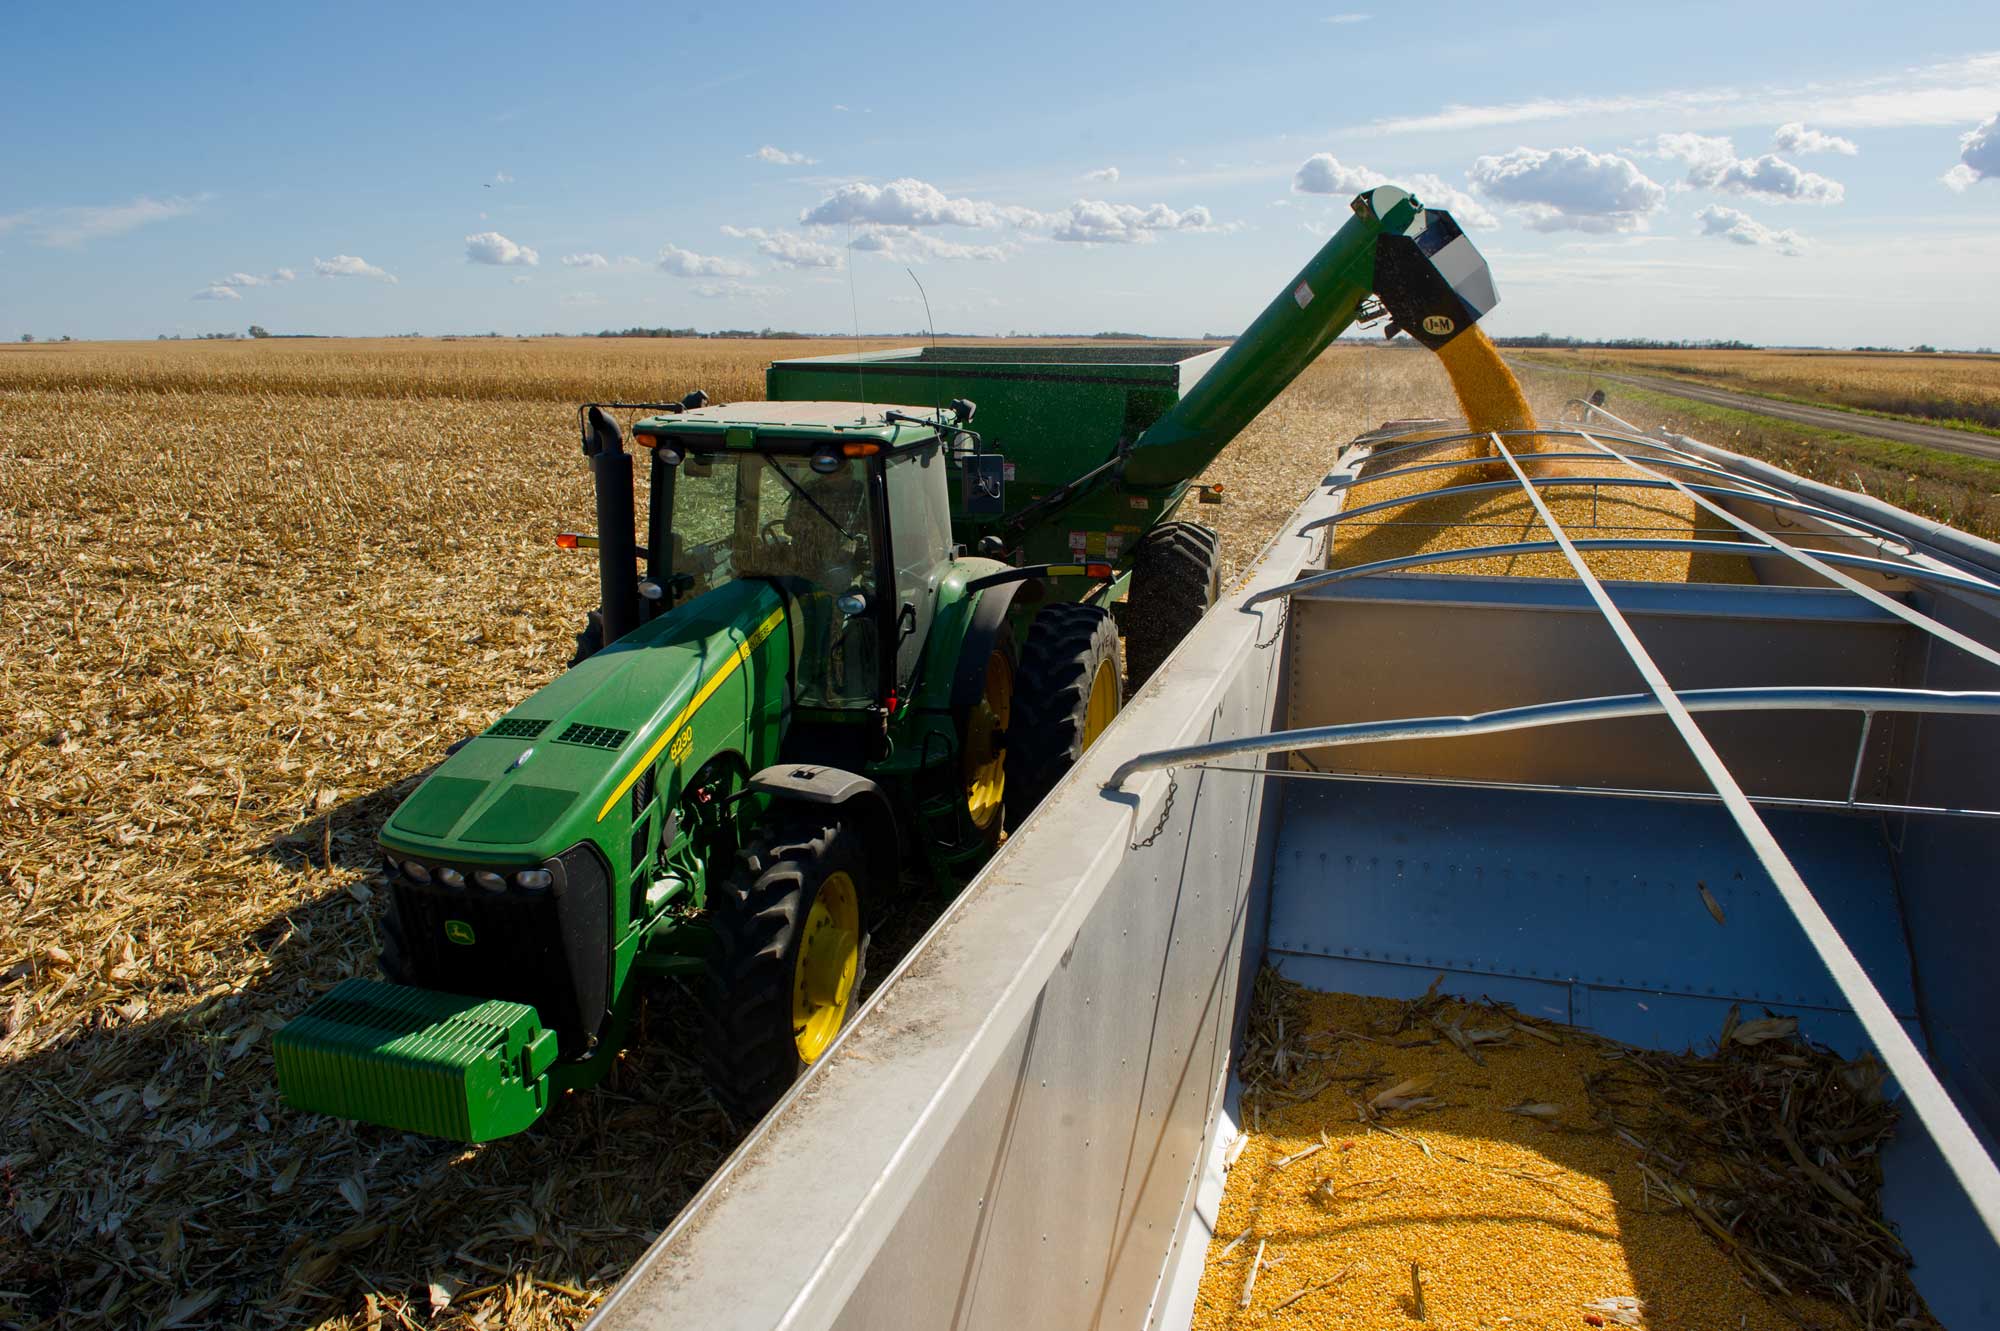 Photograph of a mechanized maize harvest. The photo shows a green tractor with a chute extending up and to the side. The chute is expelling maize kernels into a trailer, which is nearly full.